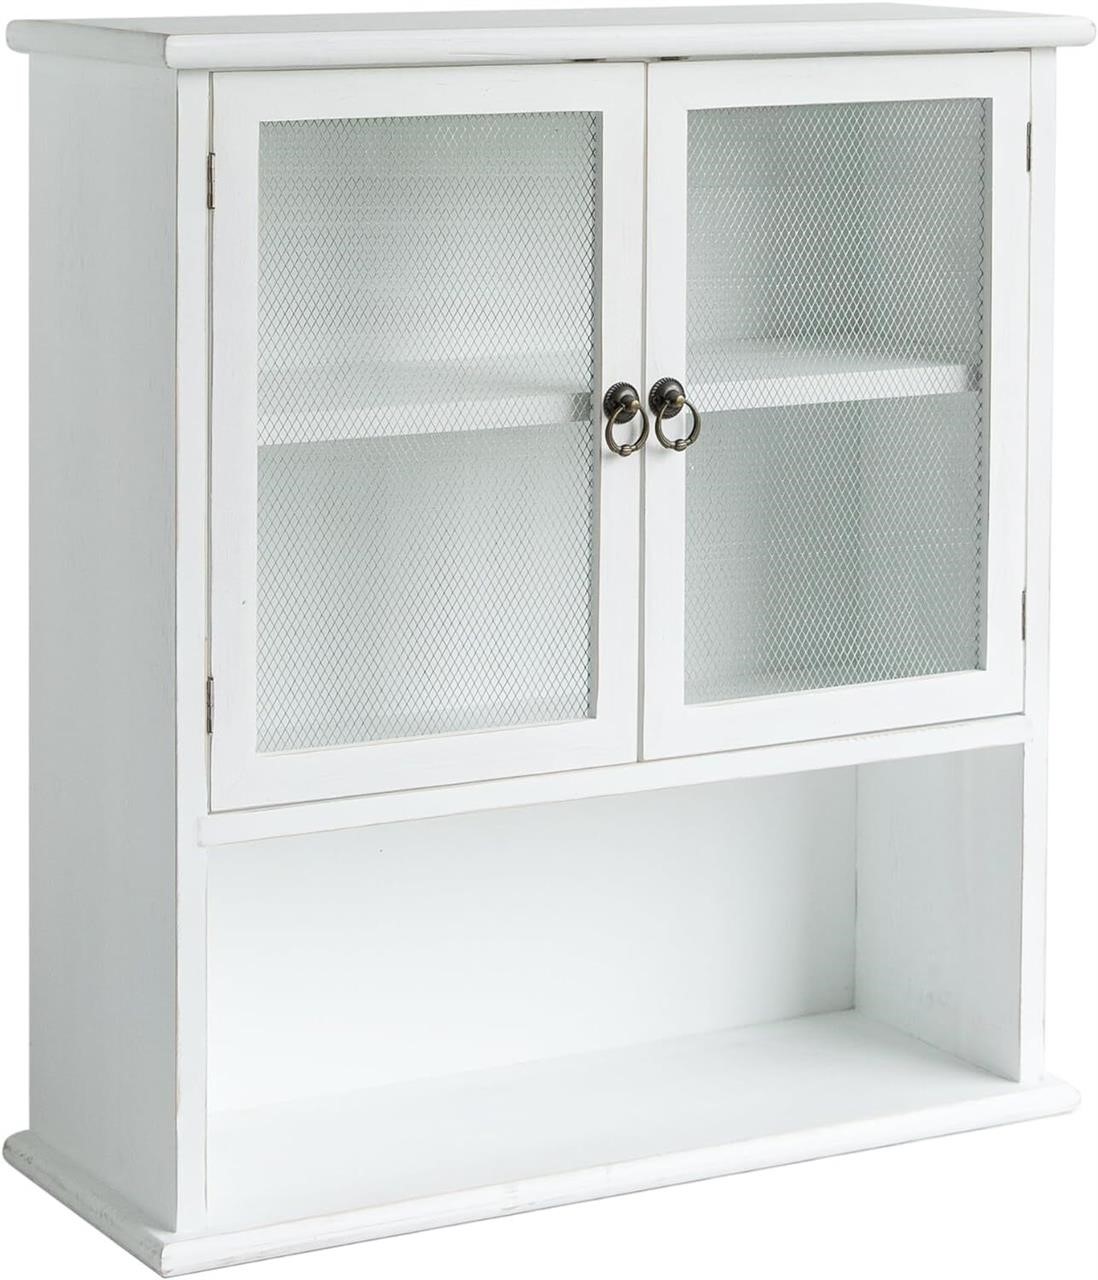 COLLECTIVE HOME - 24 Wall Organizer Cabinet